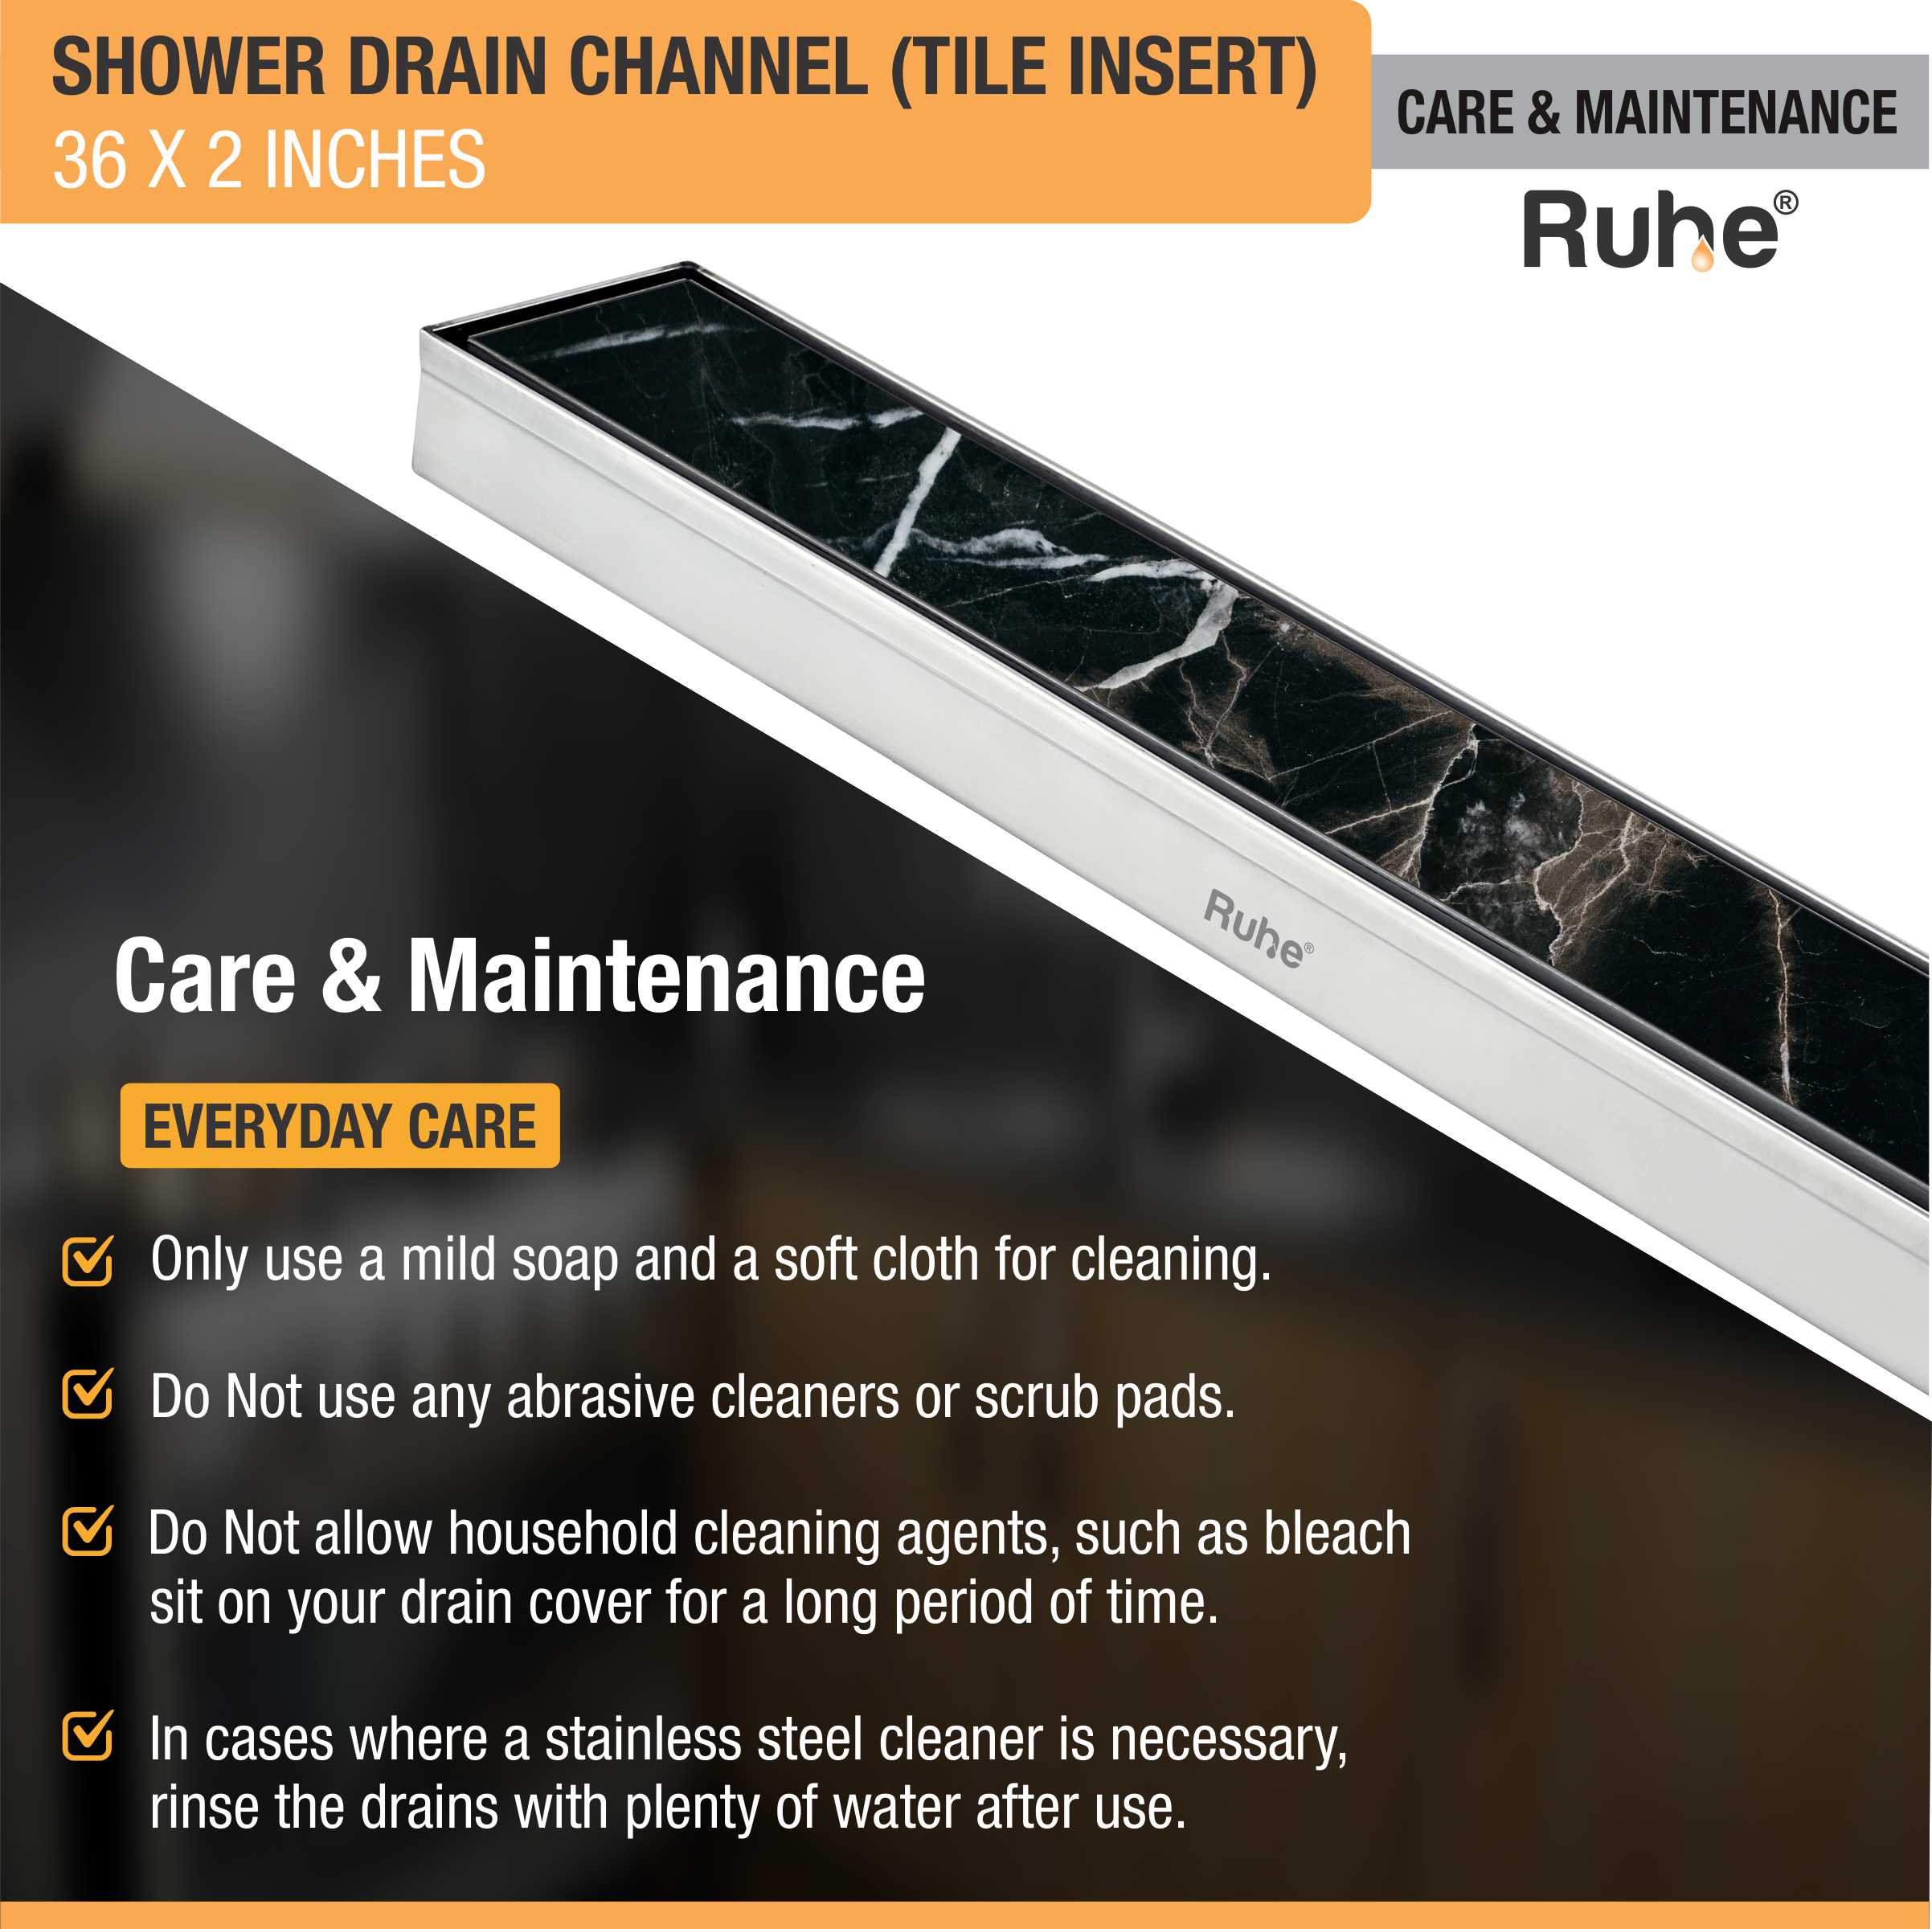 Tile Insert Shower Drain Channel (36 x 2 Inches) (304 Grade) care and maintenance